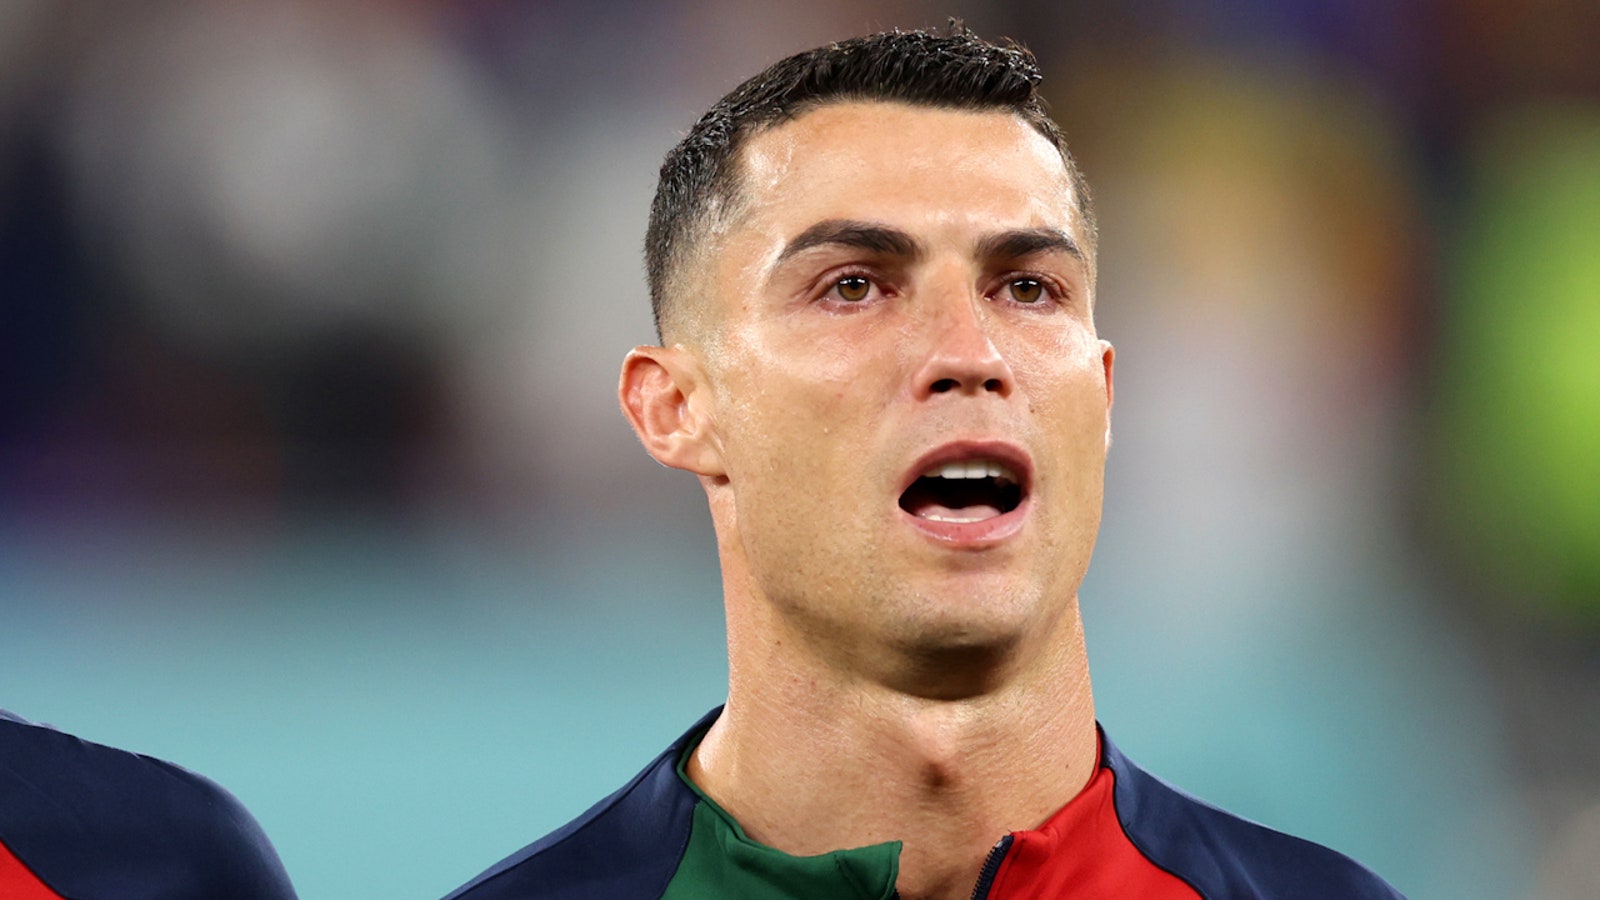 Cristiano Ronaldo cries during the national anthem of Portugal